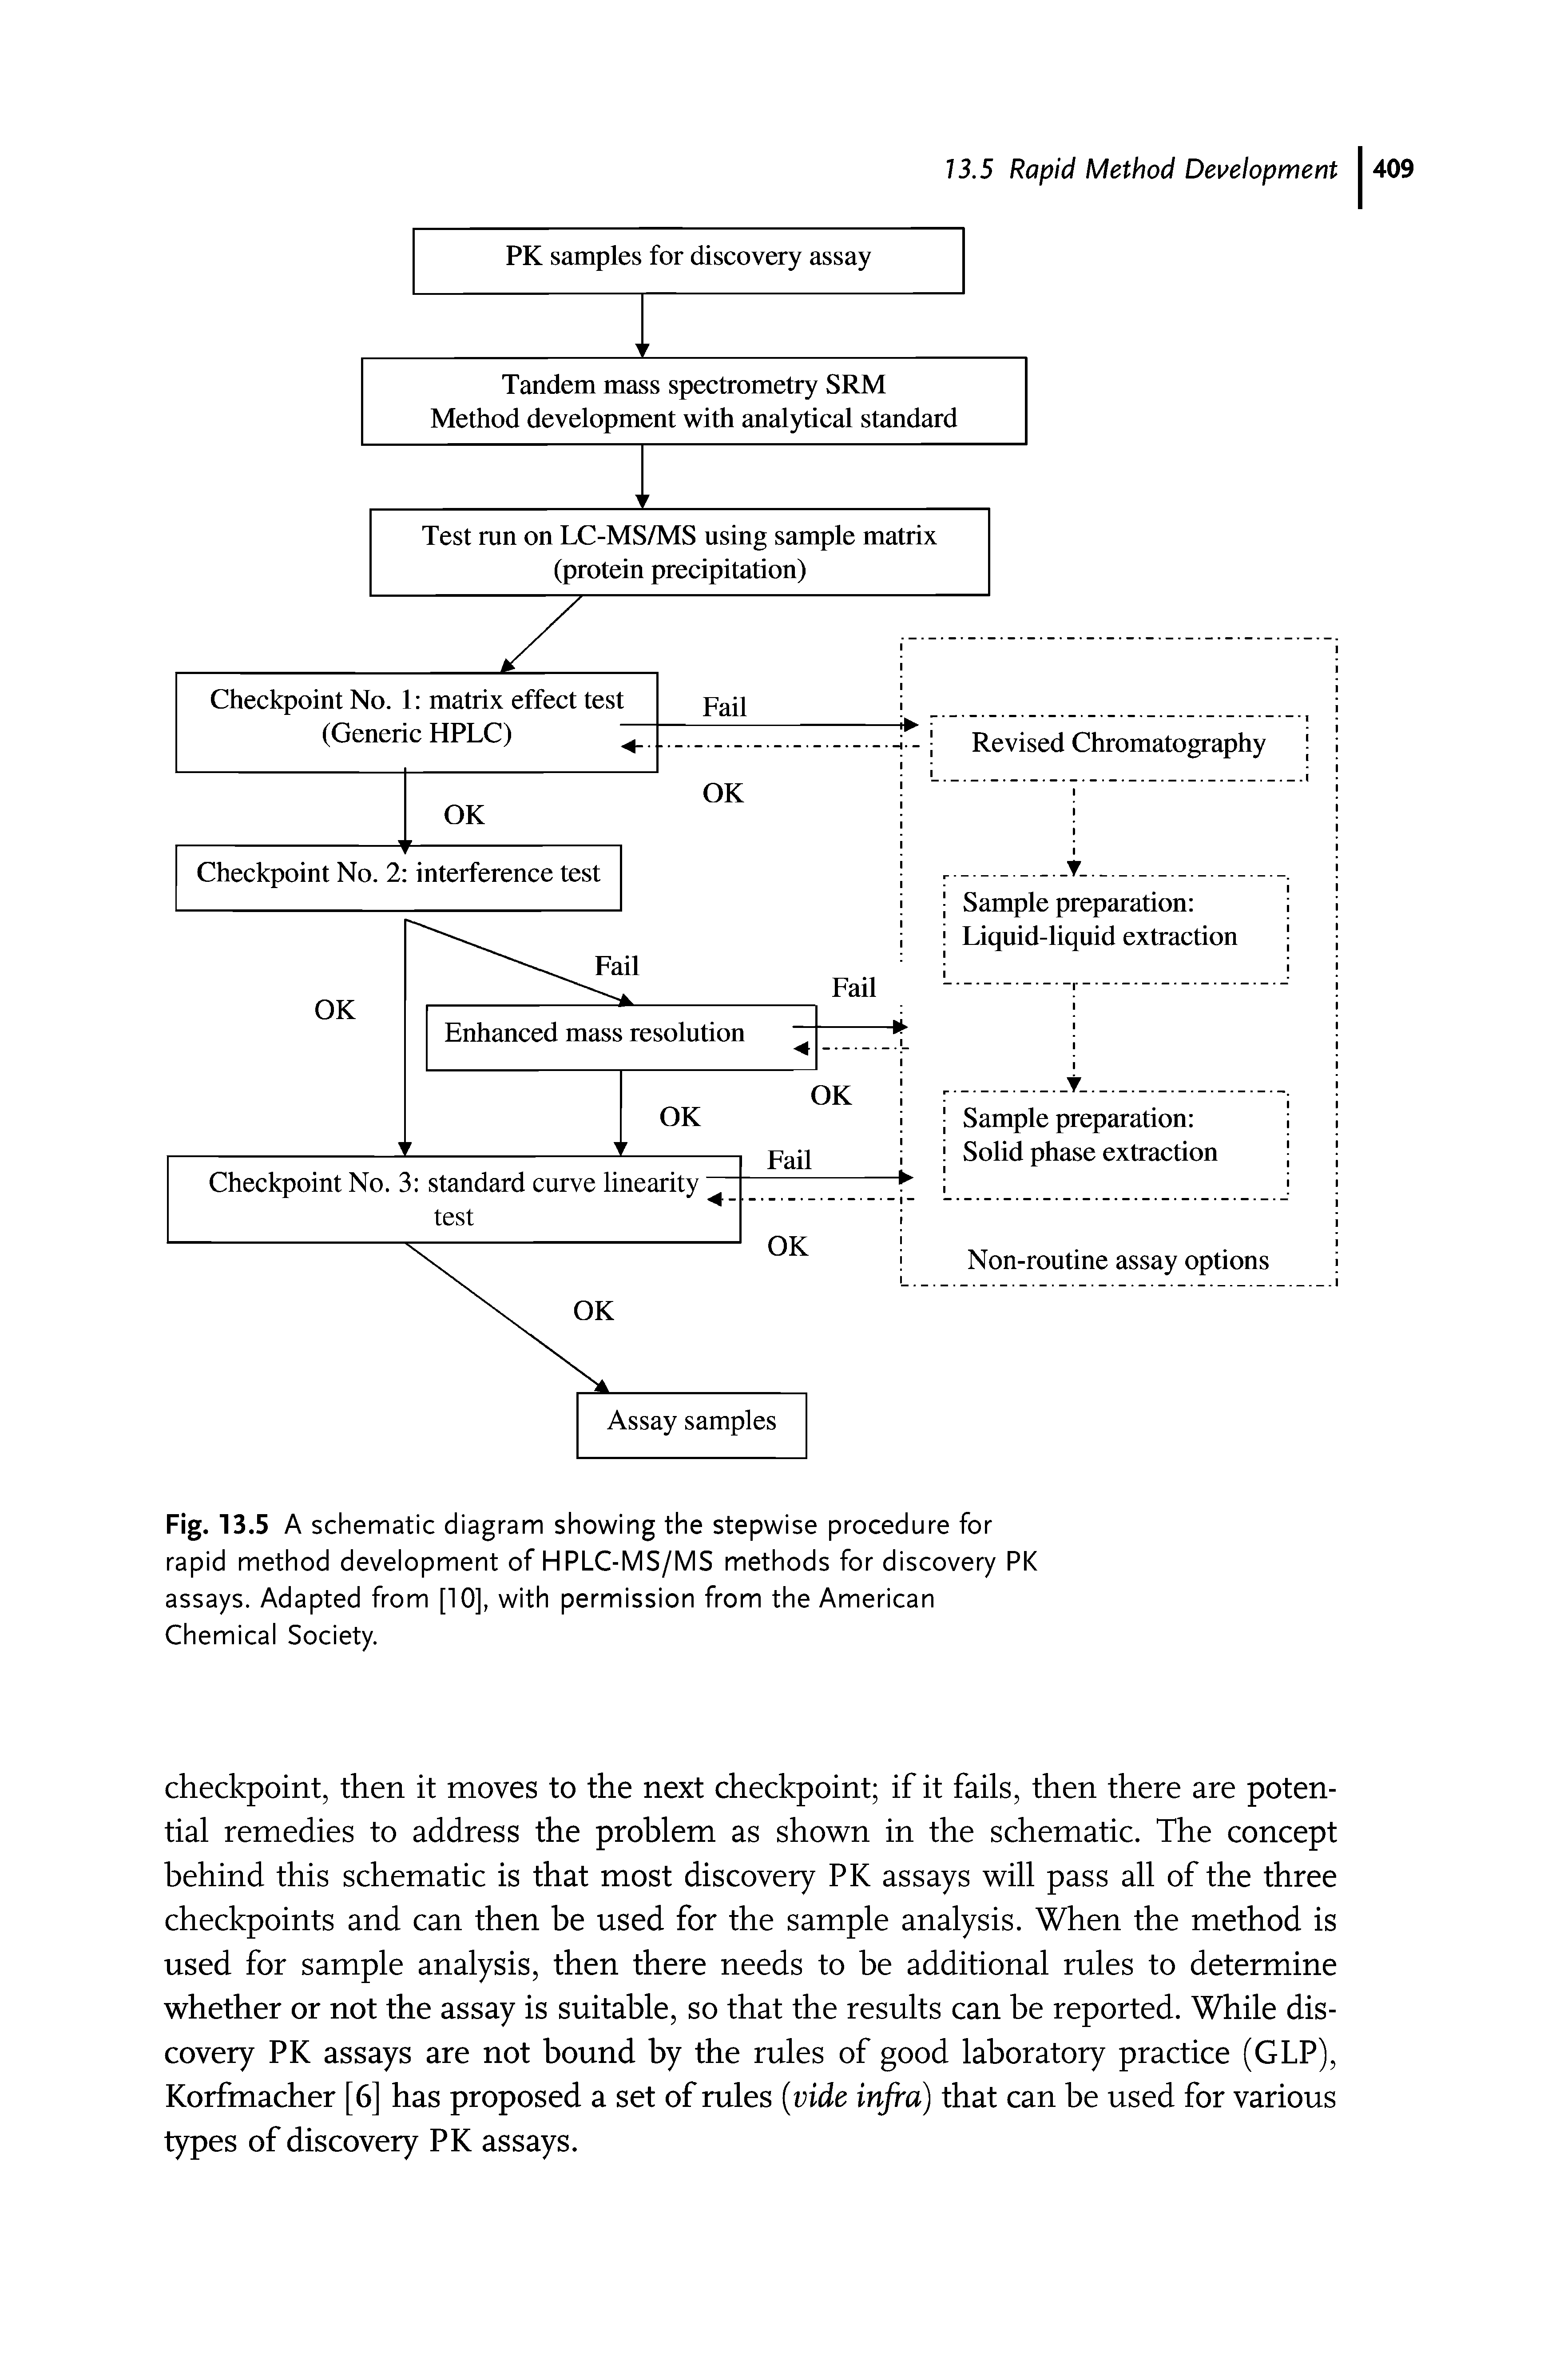 Fig. 13.5 A schematic diagram showing the stepwise procedure for rapid method development of HPLC-MS/MS methods for discovery PK assays. Adapted from [10], with permission from the American Chemical Society.